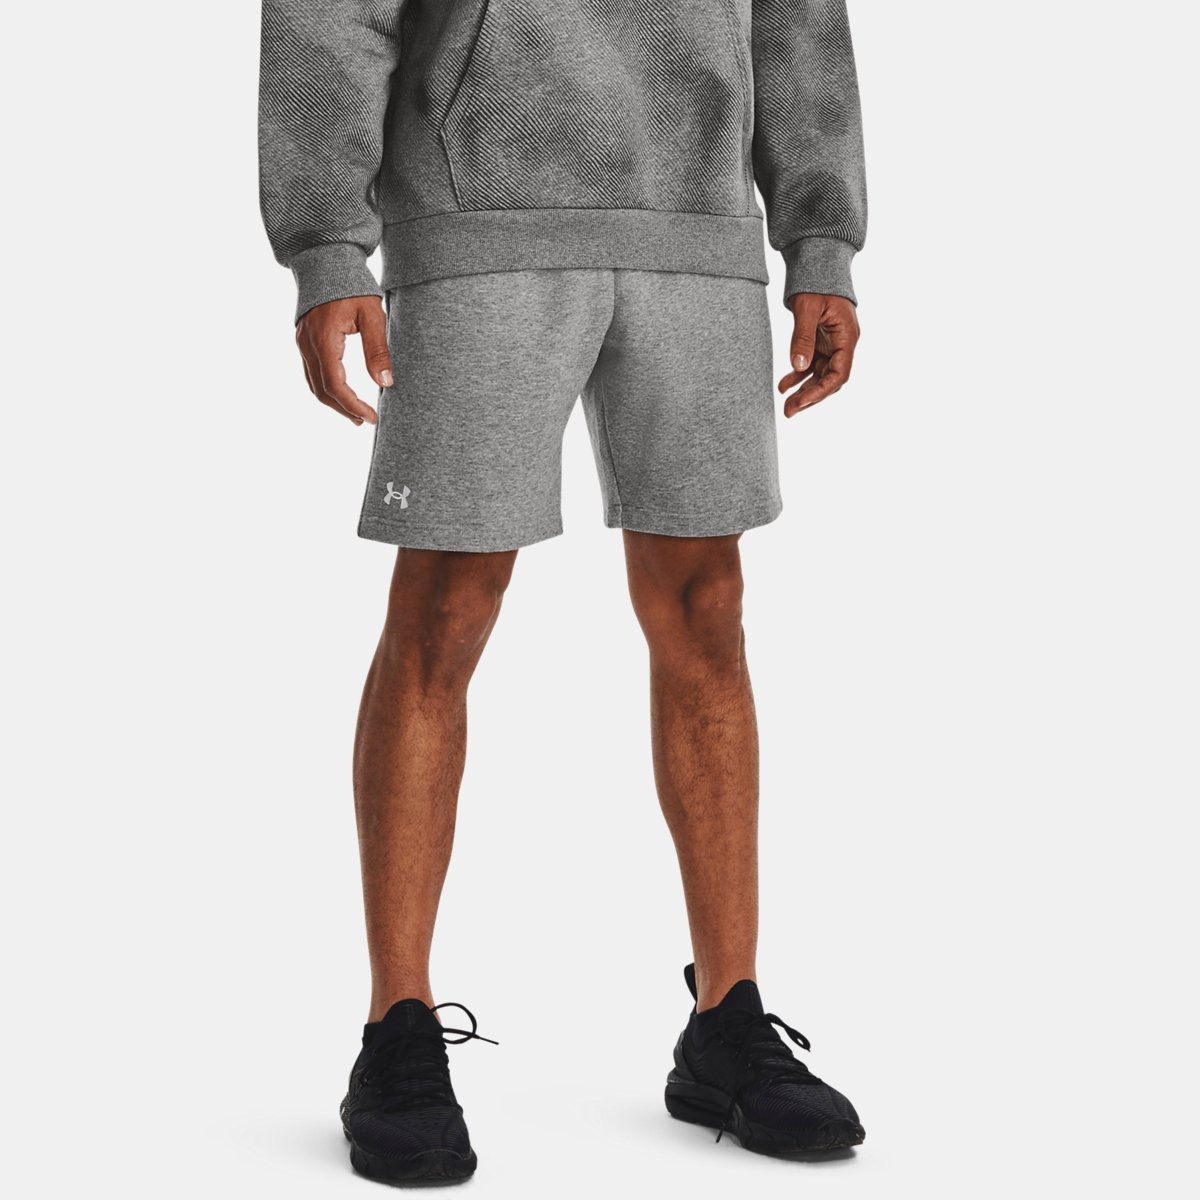 Gents Grey Shorts from Under Armour GOOFASH